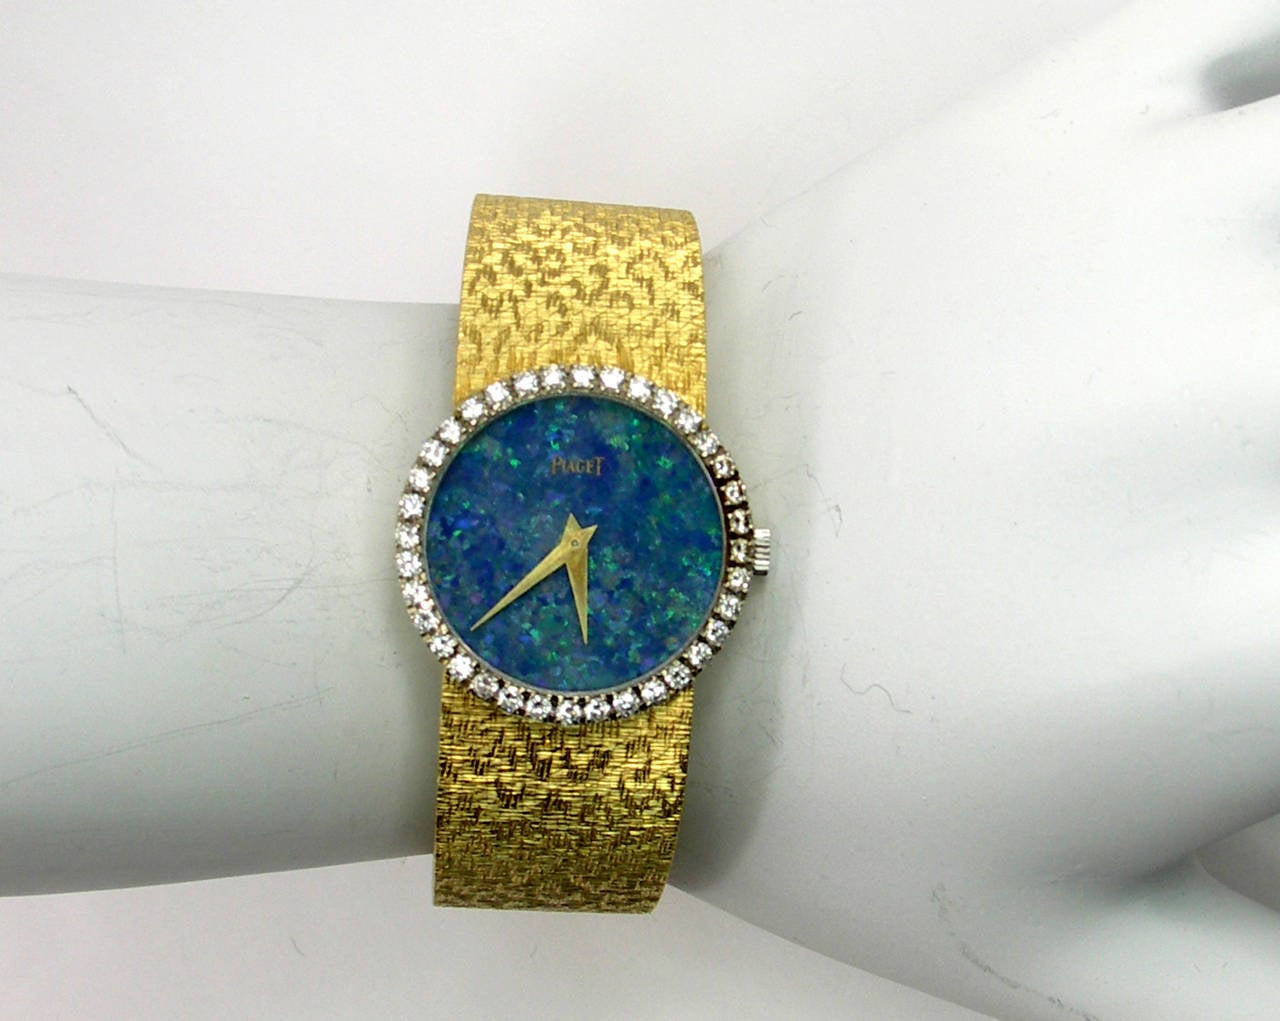 One ladies 18K yellow gold Piaget wristwatch centered around a magnificent opal dial. The bezel measures 24mm in diameter and is set with a total of approximately 1ct of round brilliant cut diamonds. The overall length is 6 and 1/8 inches, and the